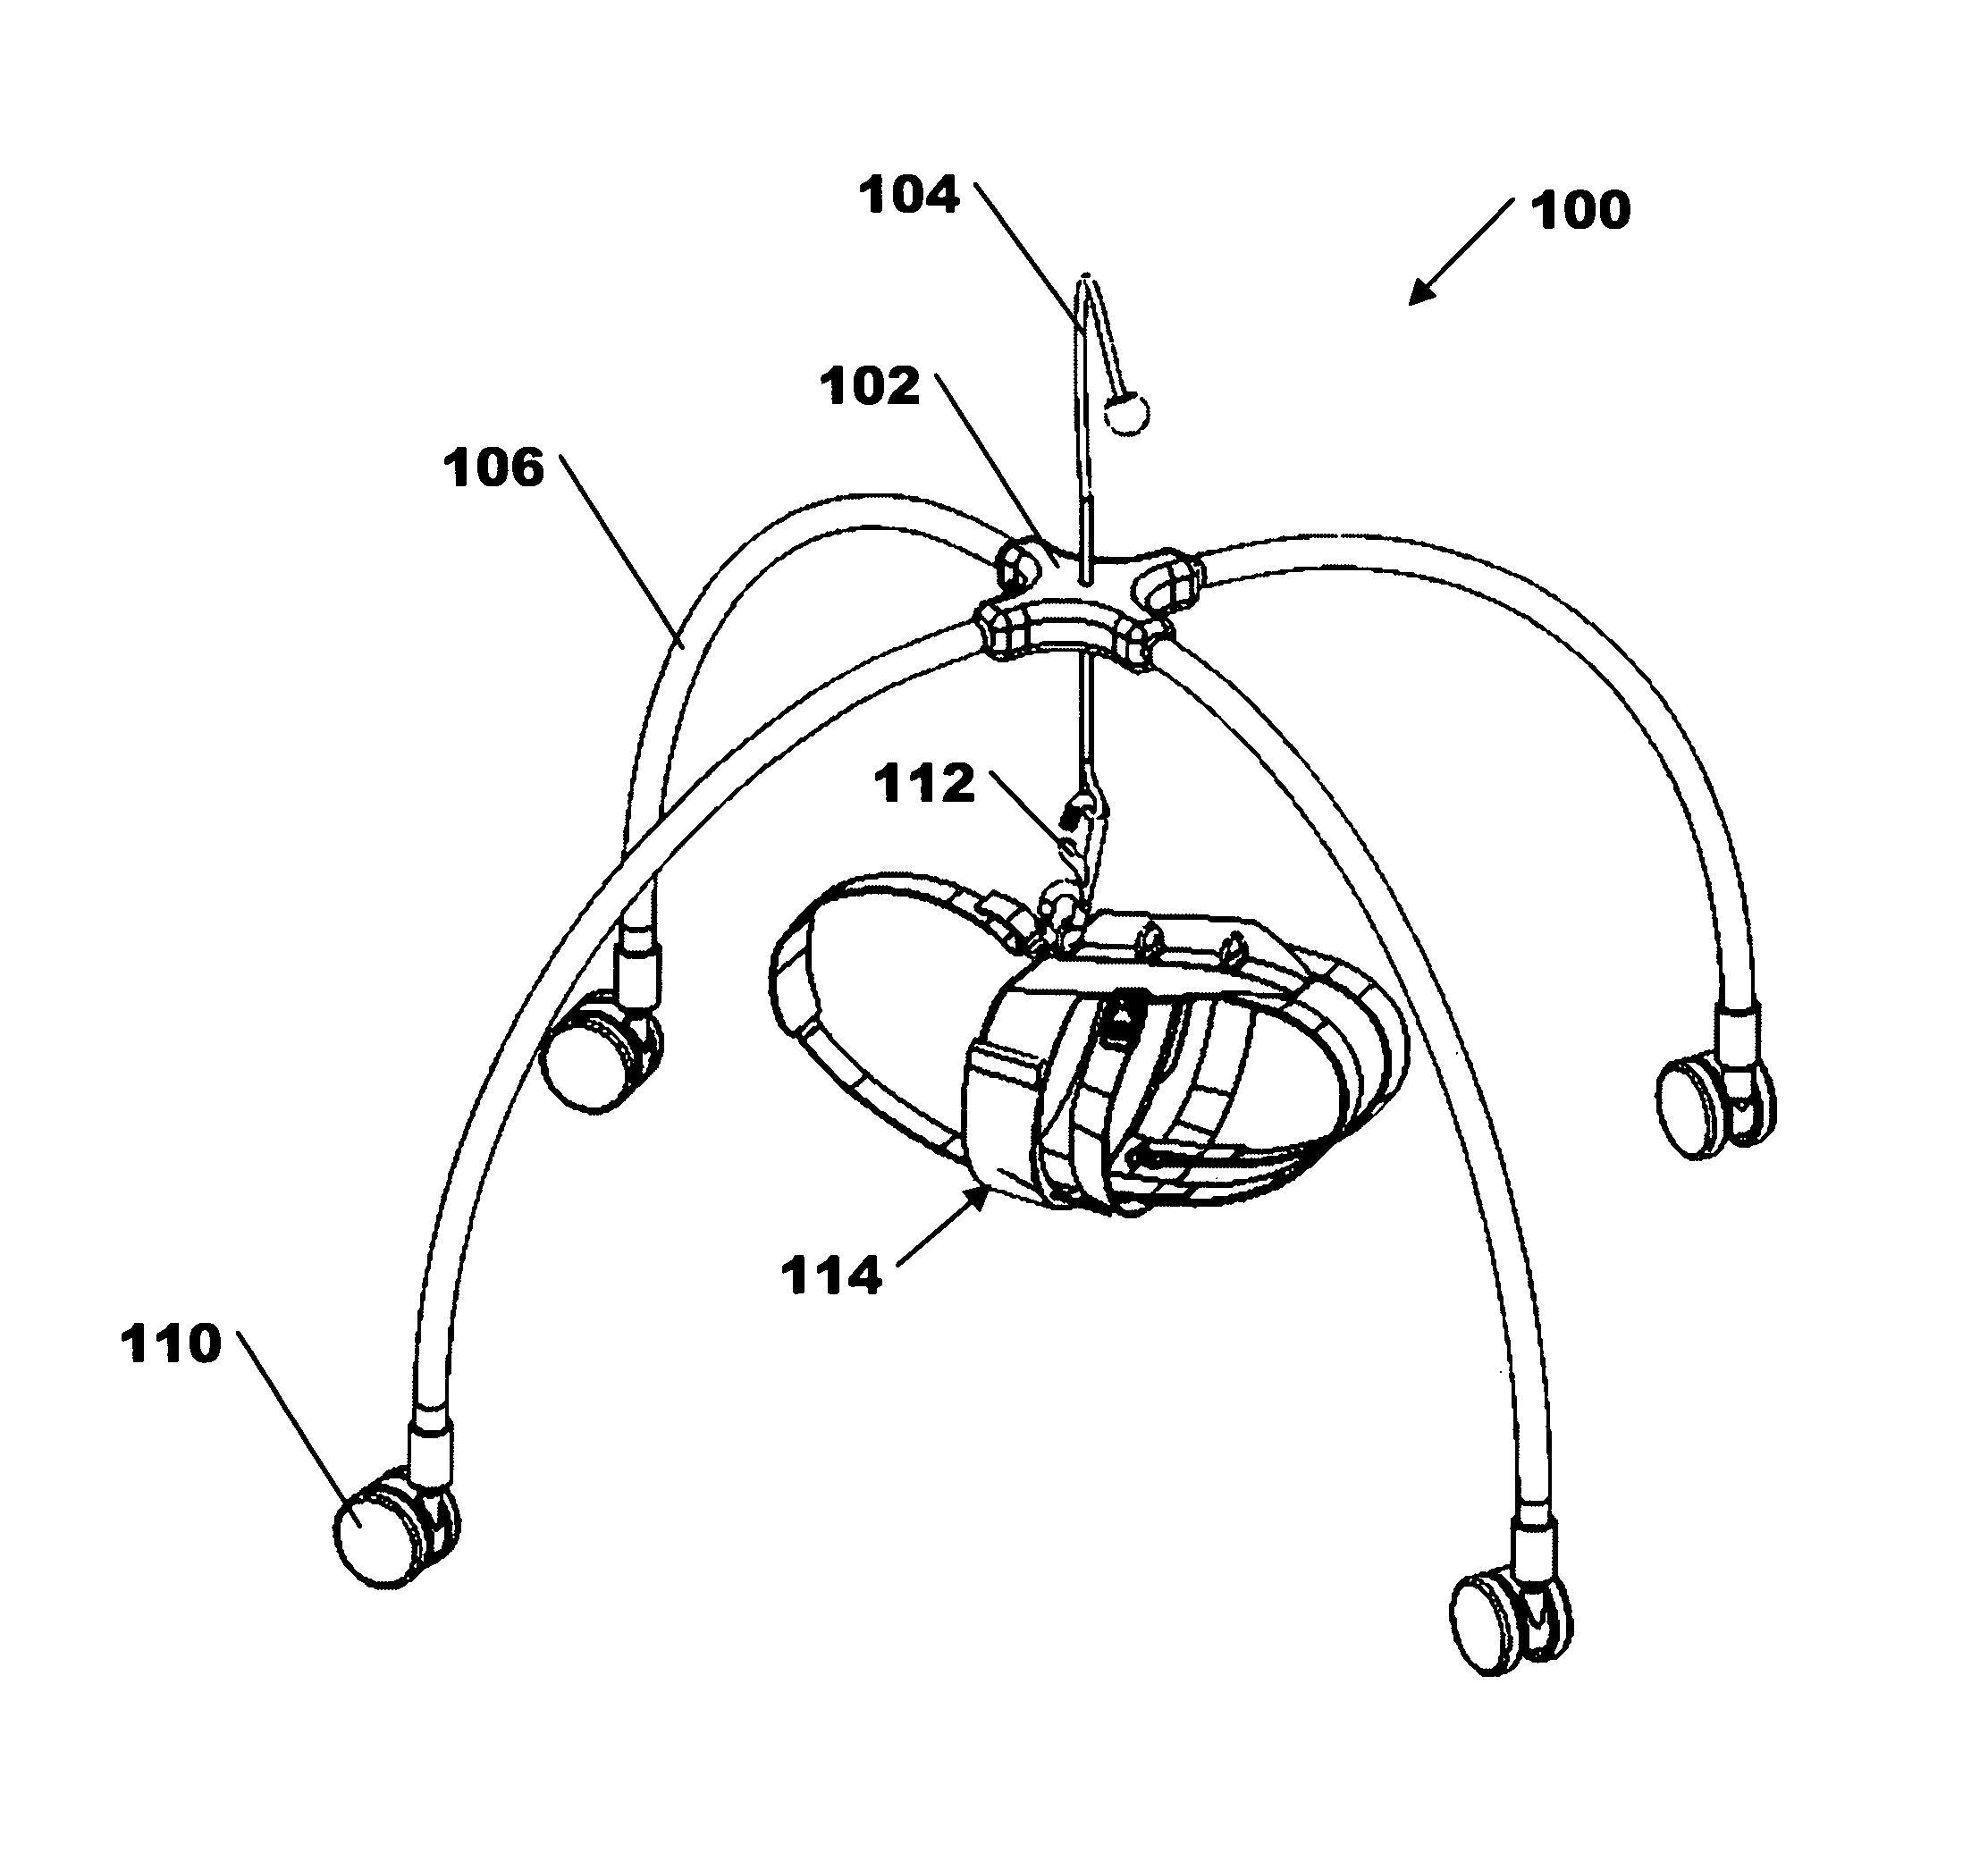 Infant mobility device